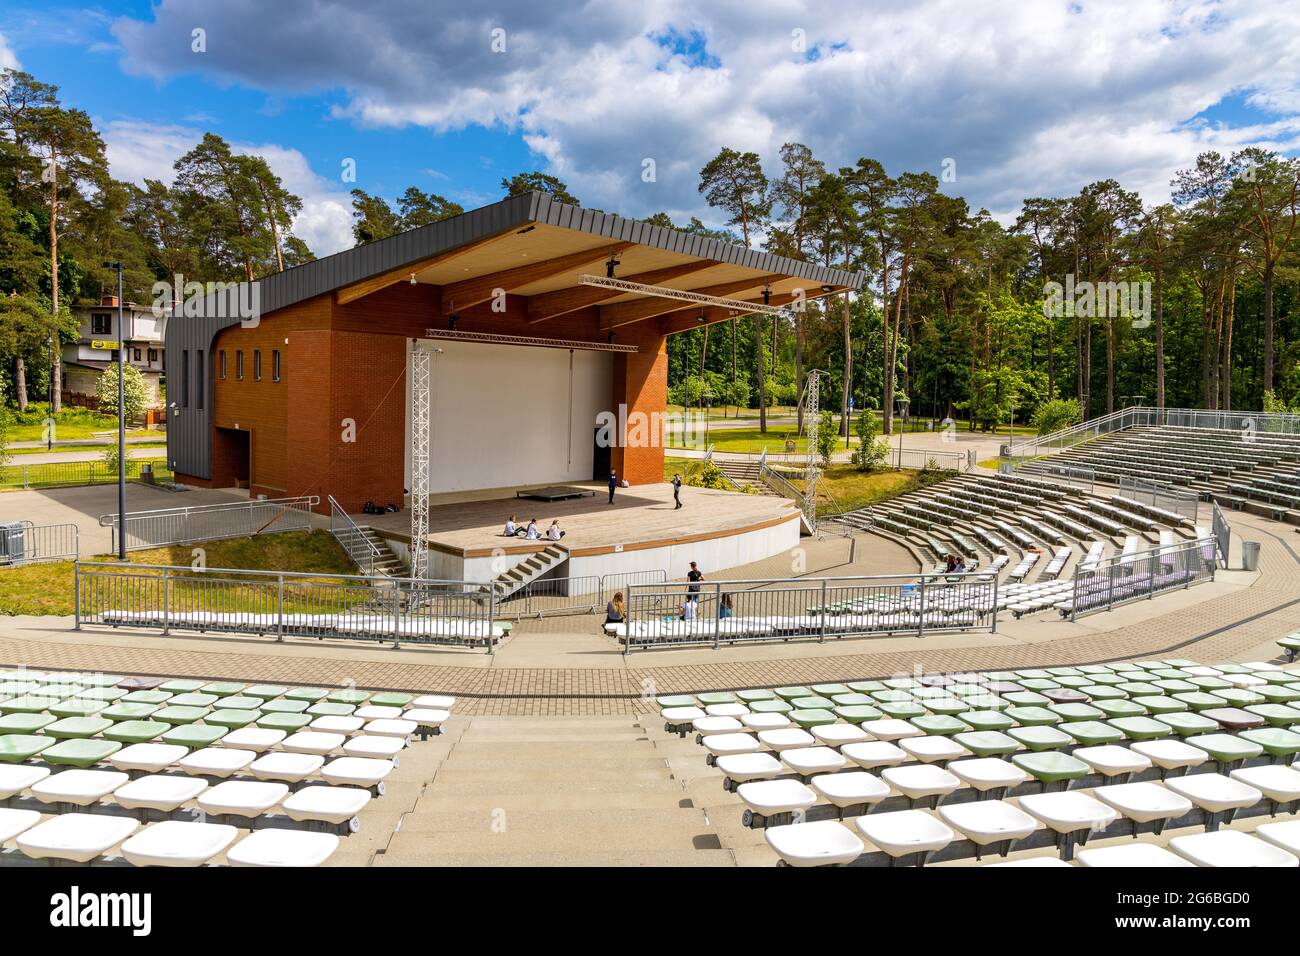 Augustow, Poland - June 1, 2021: Open air amphitheater performance stage on shore of Necko lake in Masuria lake district resort town of Augustow Stock Photo